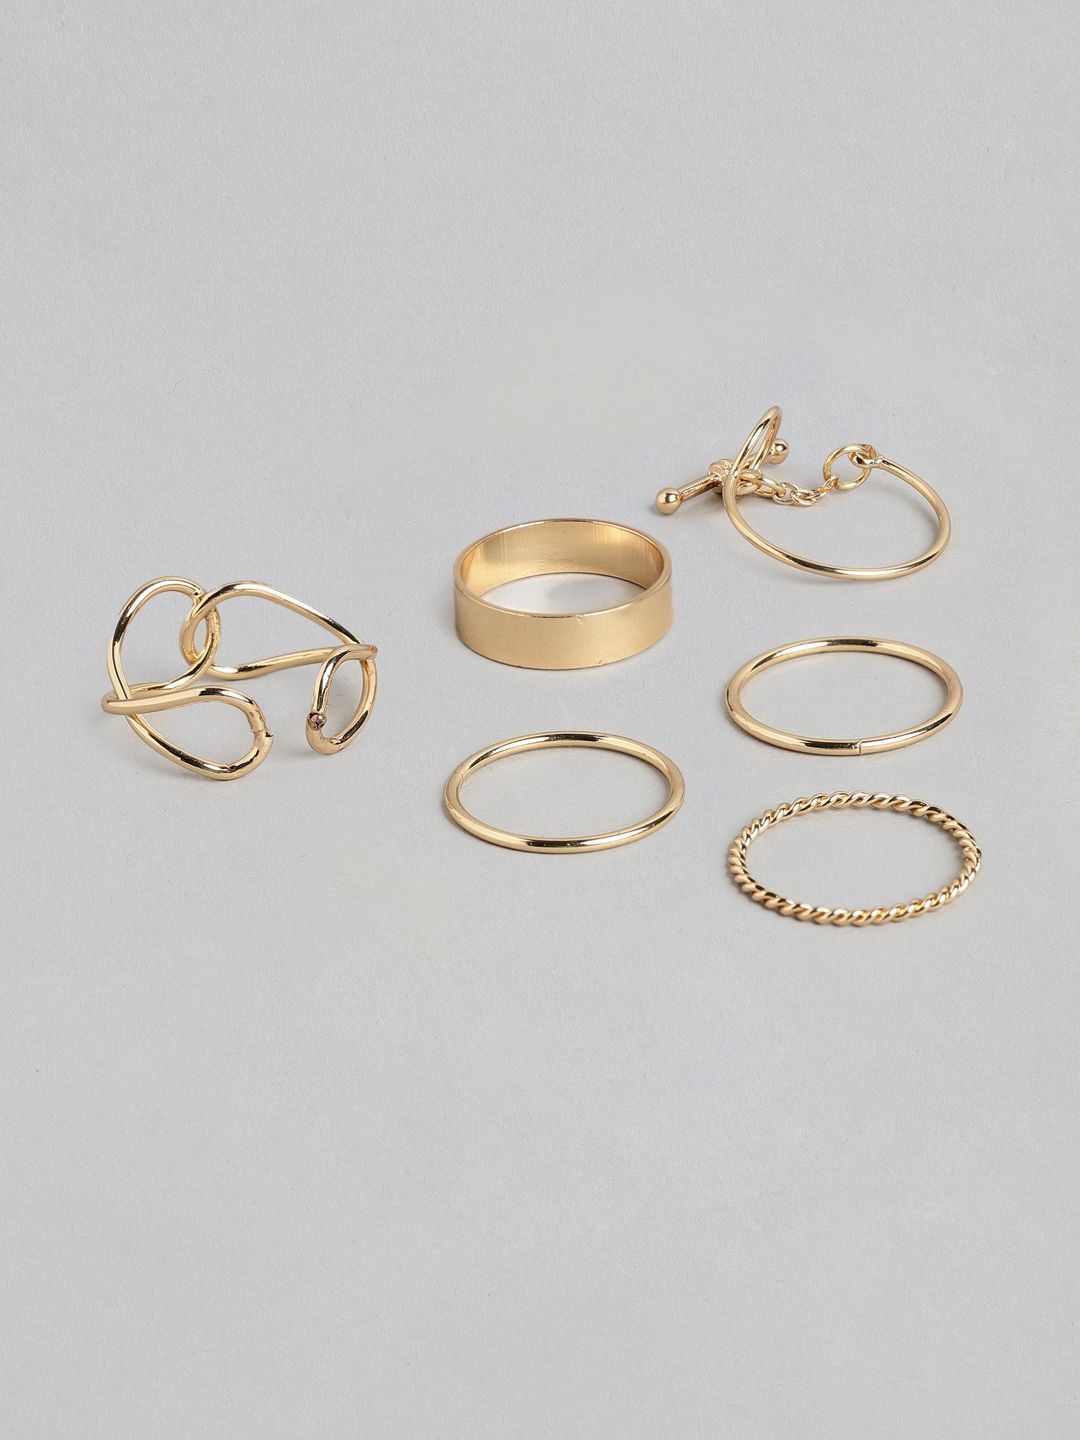 20Dresses Women Set of 6 Gold-Toned Rings Price in India